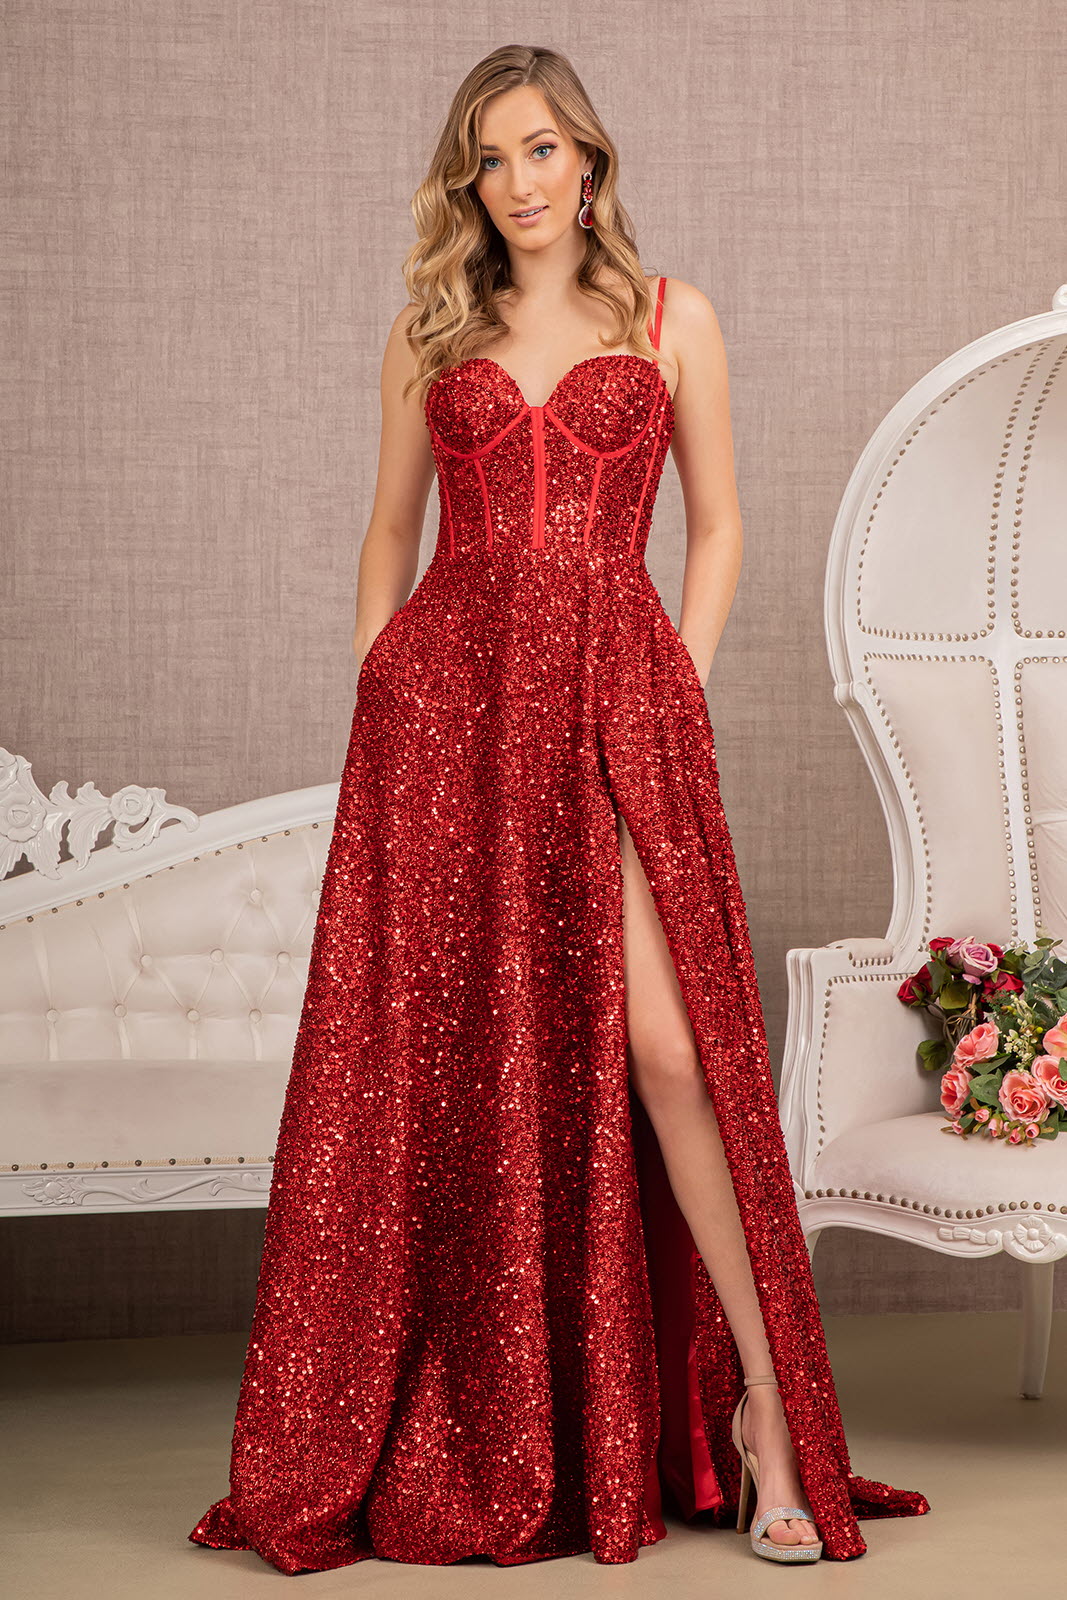 Red Beaded Lace Applique V Neck Red Prom Dresses 2023 Elegant Floor Length  Evening Gown For Women In Saudi Arabia From Xzy1984316, $207.08 | DHgate.Com